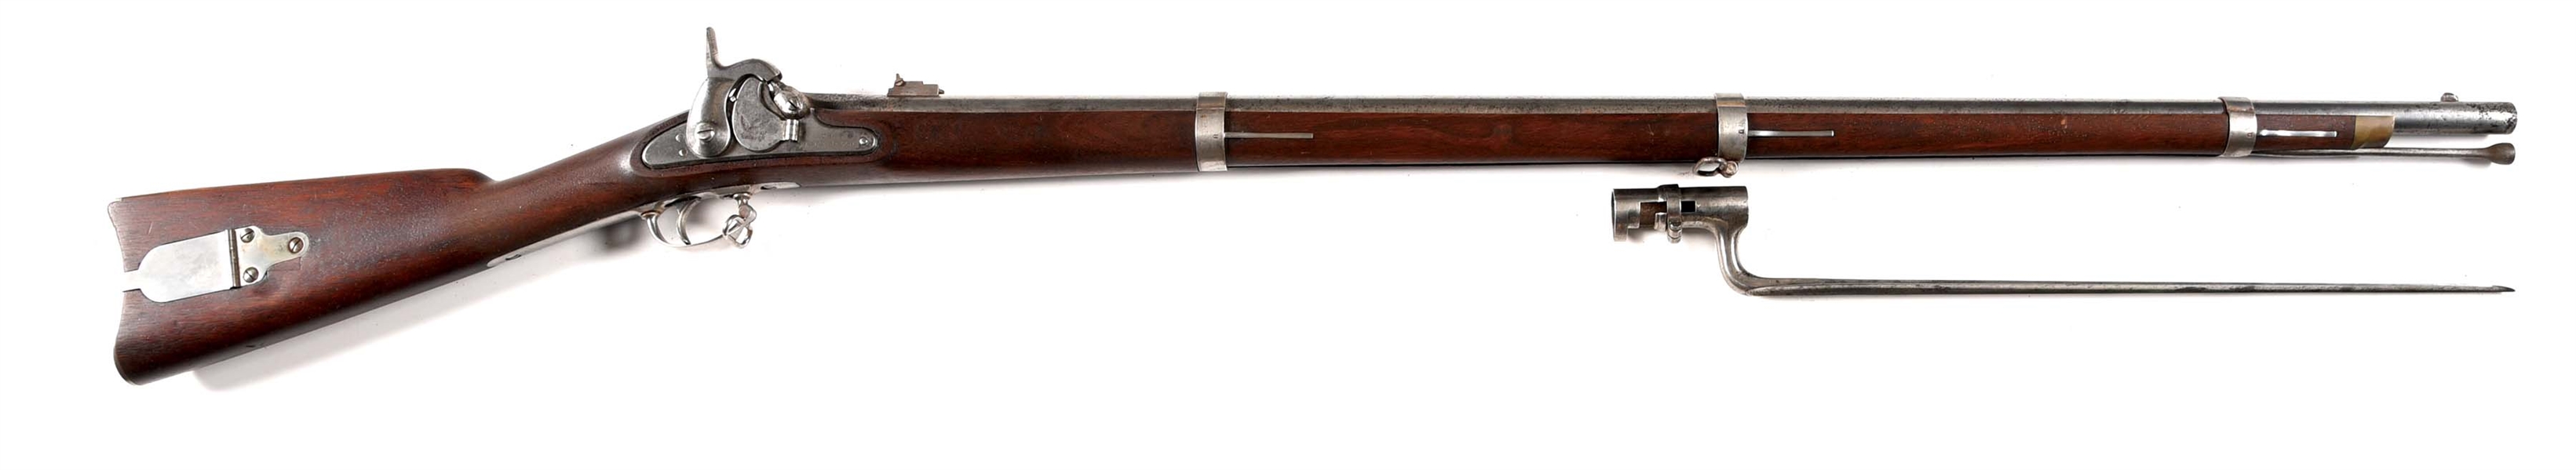 (A) HARPERS FERRY 1855 PERCUSSION RIFLE MUSKET DATED 1858.